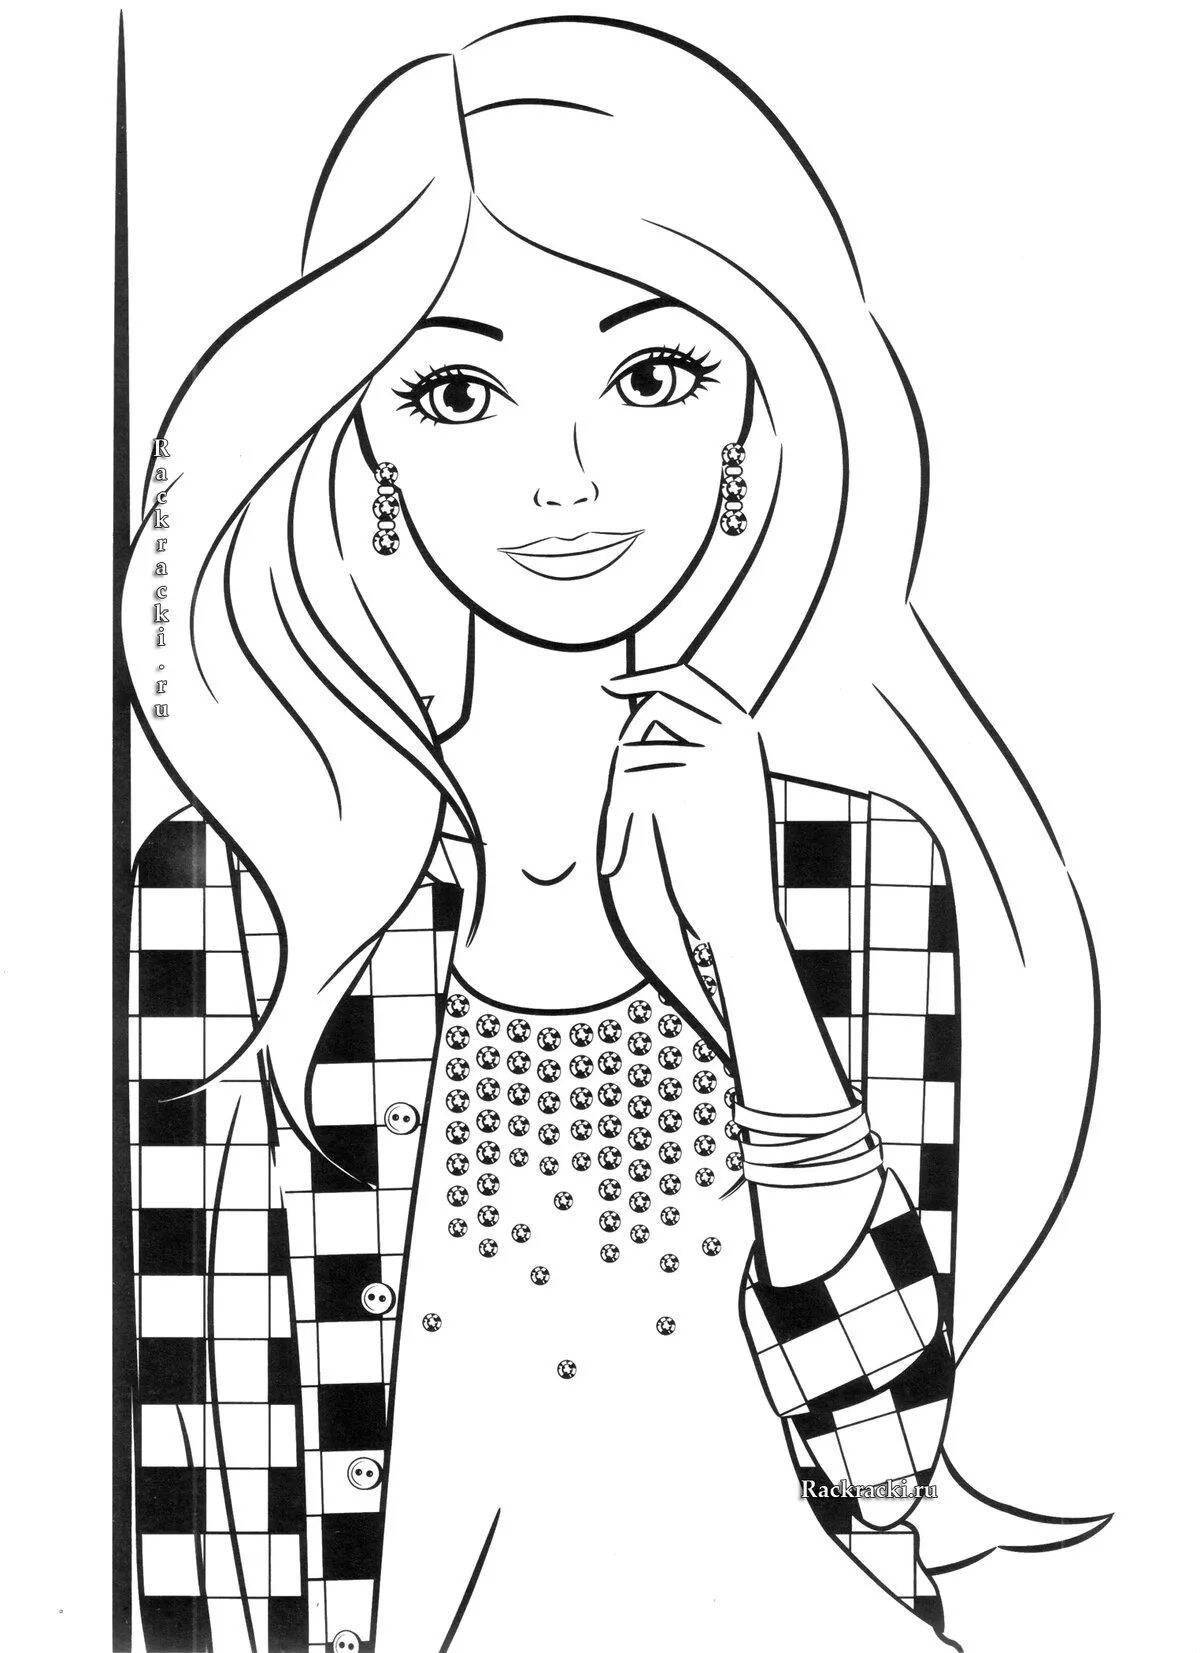 Amazing coloring pages for girls 11-12 years old